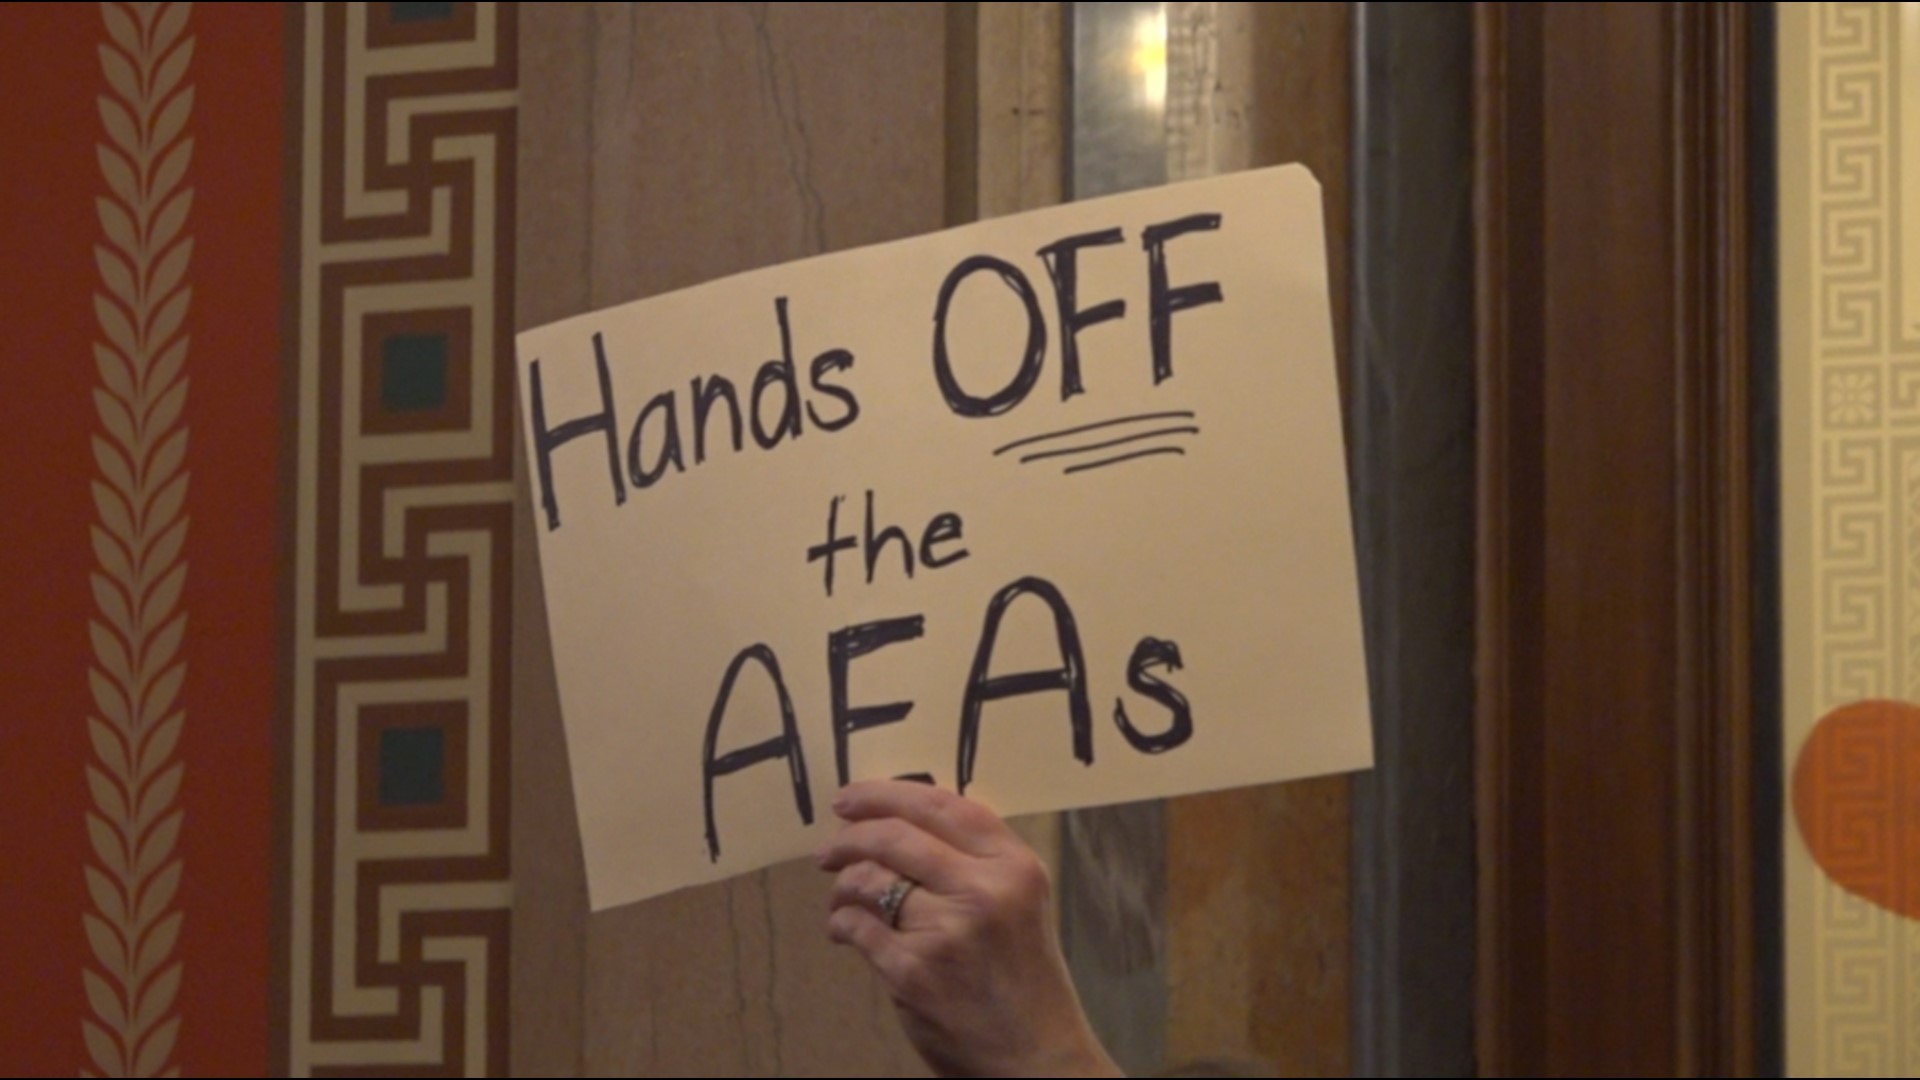 A newly-signed law will impact how AEAs are funded in the state - something sending workers packing.